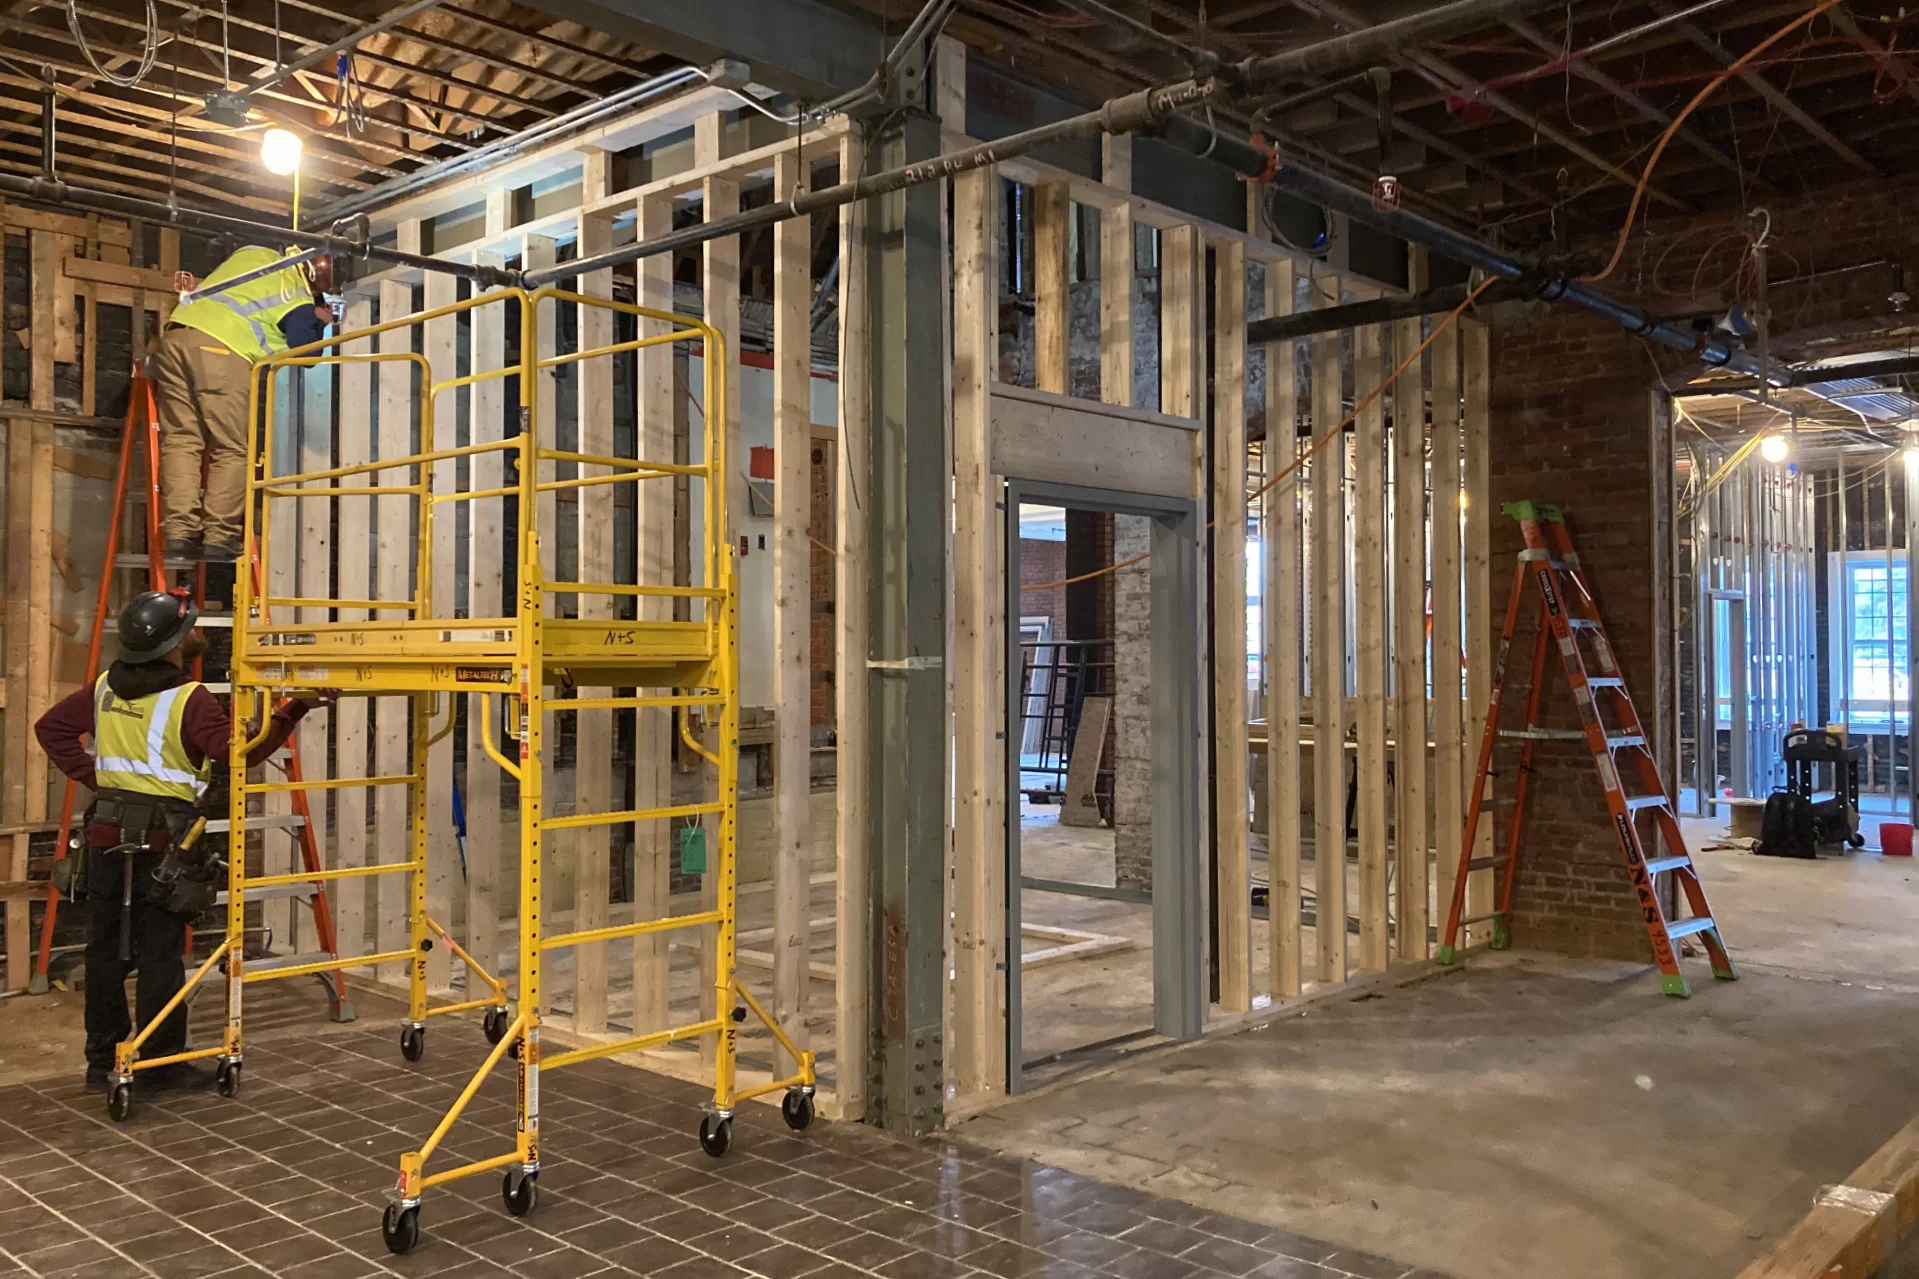 Framers create a vestibule in Chase Hall’s lobby that will enclose new stairs connecting three levels. (Doug Hubley/Bates College)